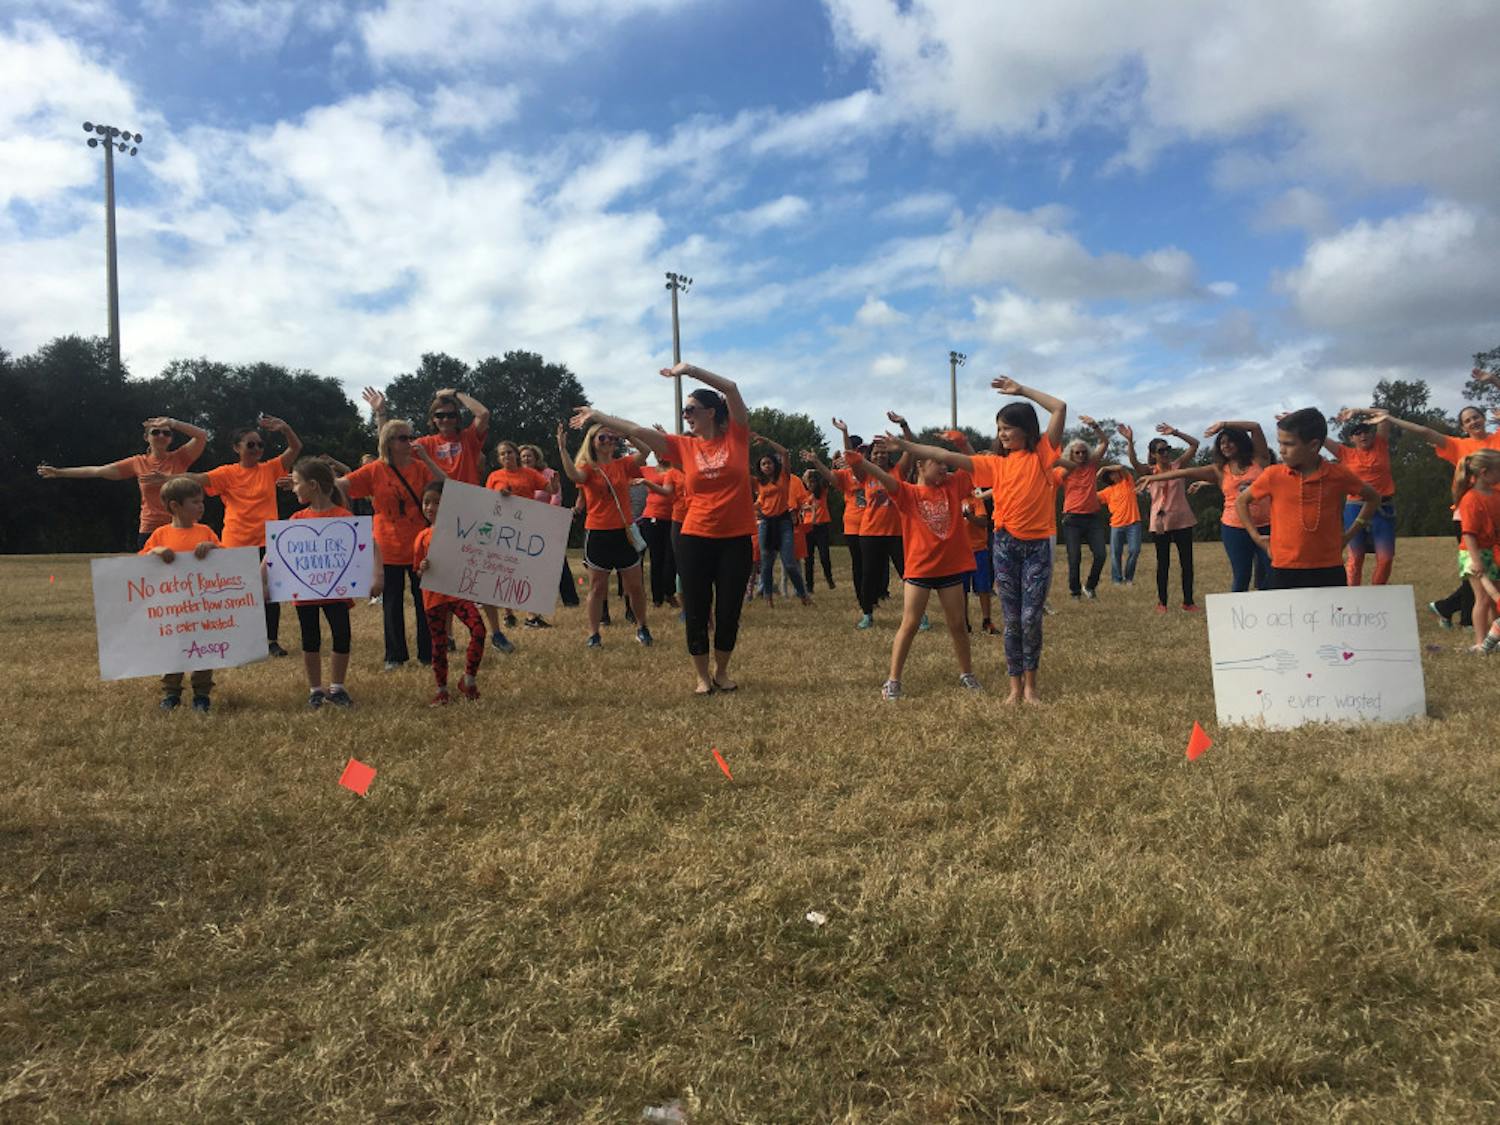 Children and adults gather on Flavet Field to participate in Gainesville’s first “Dance for Kindness.” They were among thousands around the world who danced in honor of World Kindness Day, which is today.